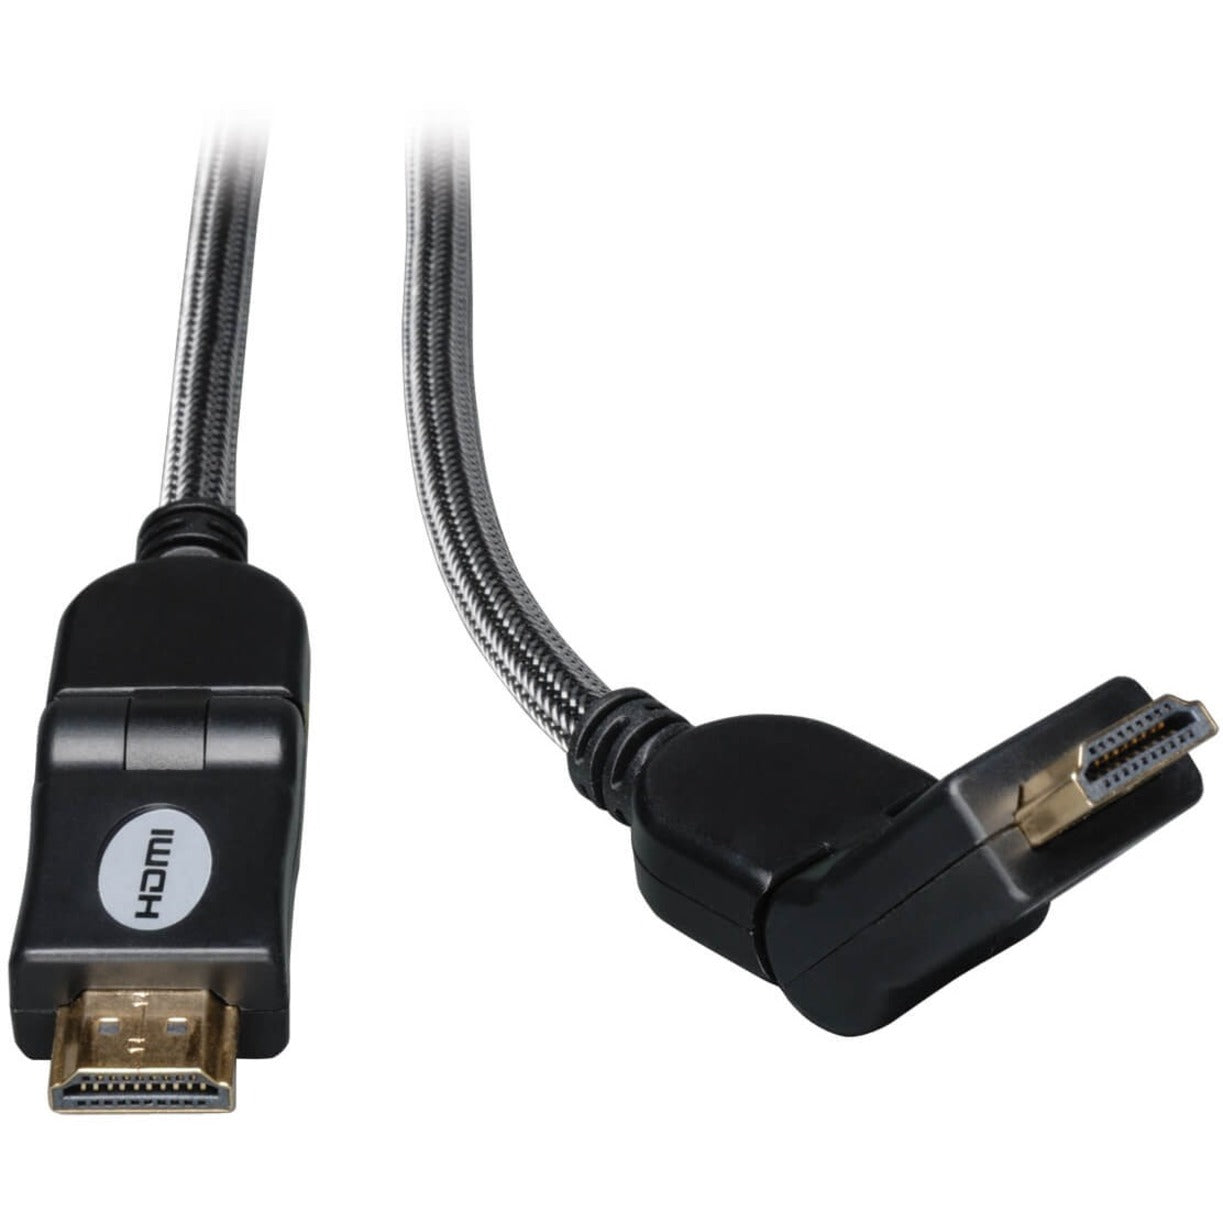 Tripp Lite P568-006-SW HDMI Cable, 6-ft. Gold Cable with Swivel Connectors